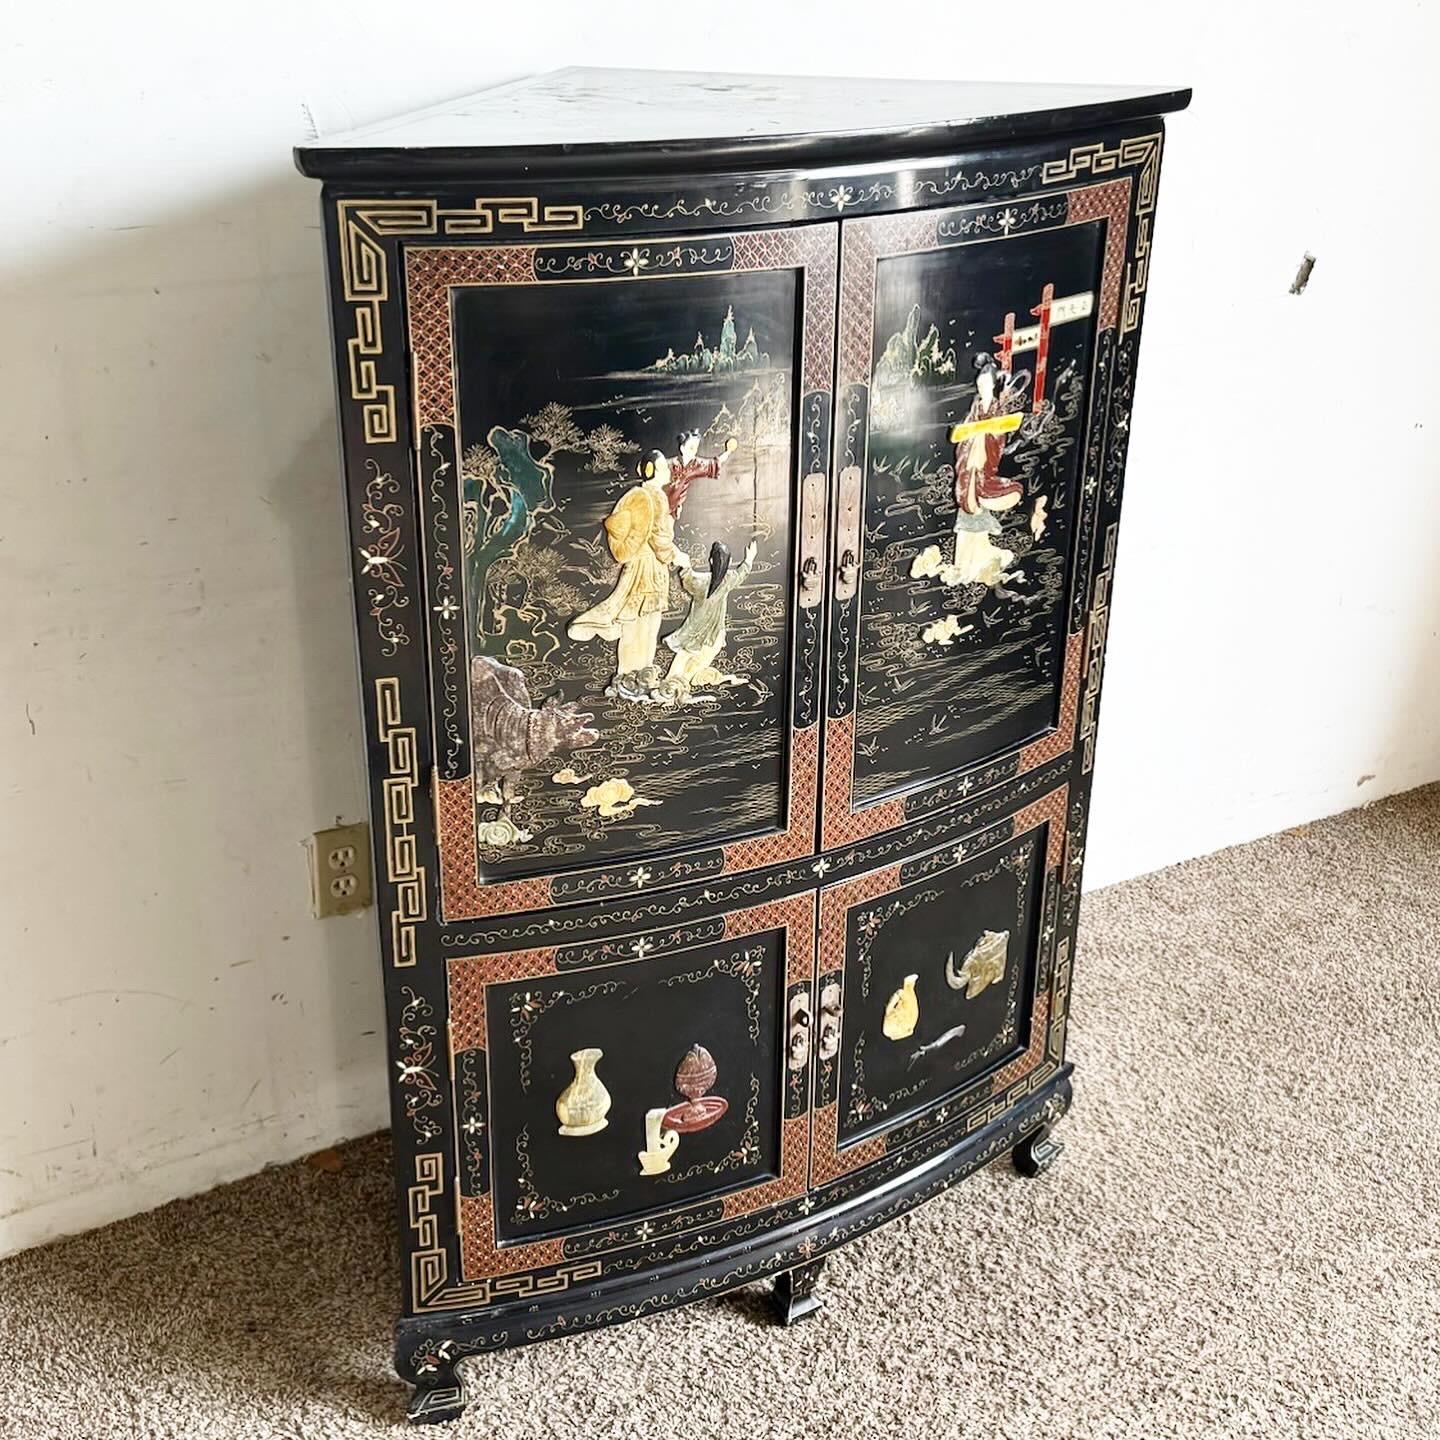 Discover the elegance of traditional Chinese craftsmanship with the Chinese Black Lacquered and Hand Painted Demi Lune Cabinet. Its elegant demi lune shape, enhanced with a rich black lacquer and intricate hand-painted designs, embodies the beauty